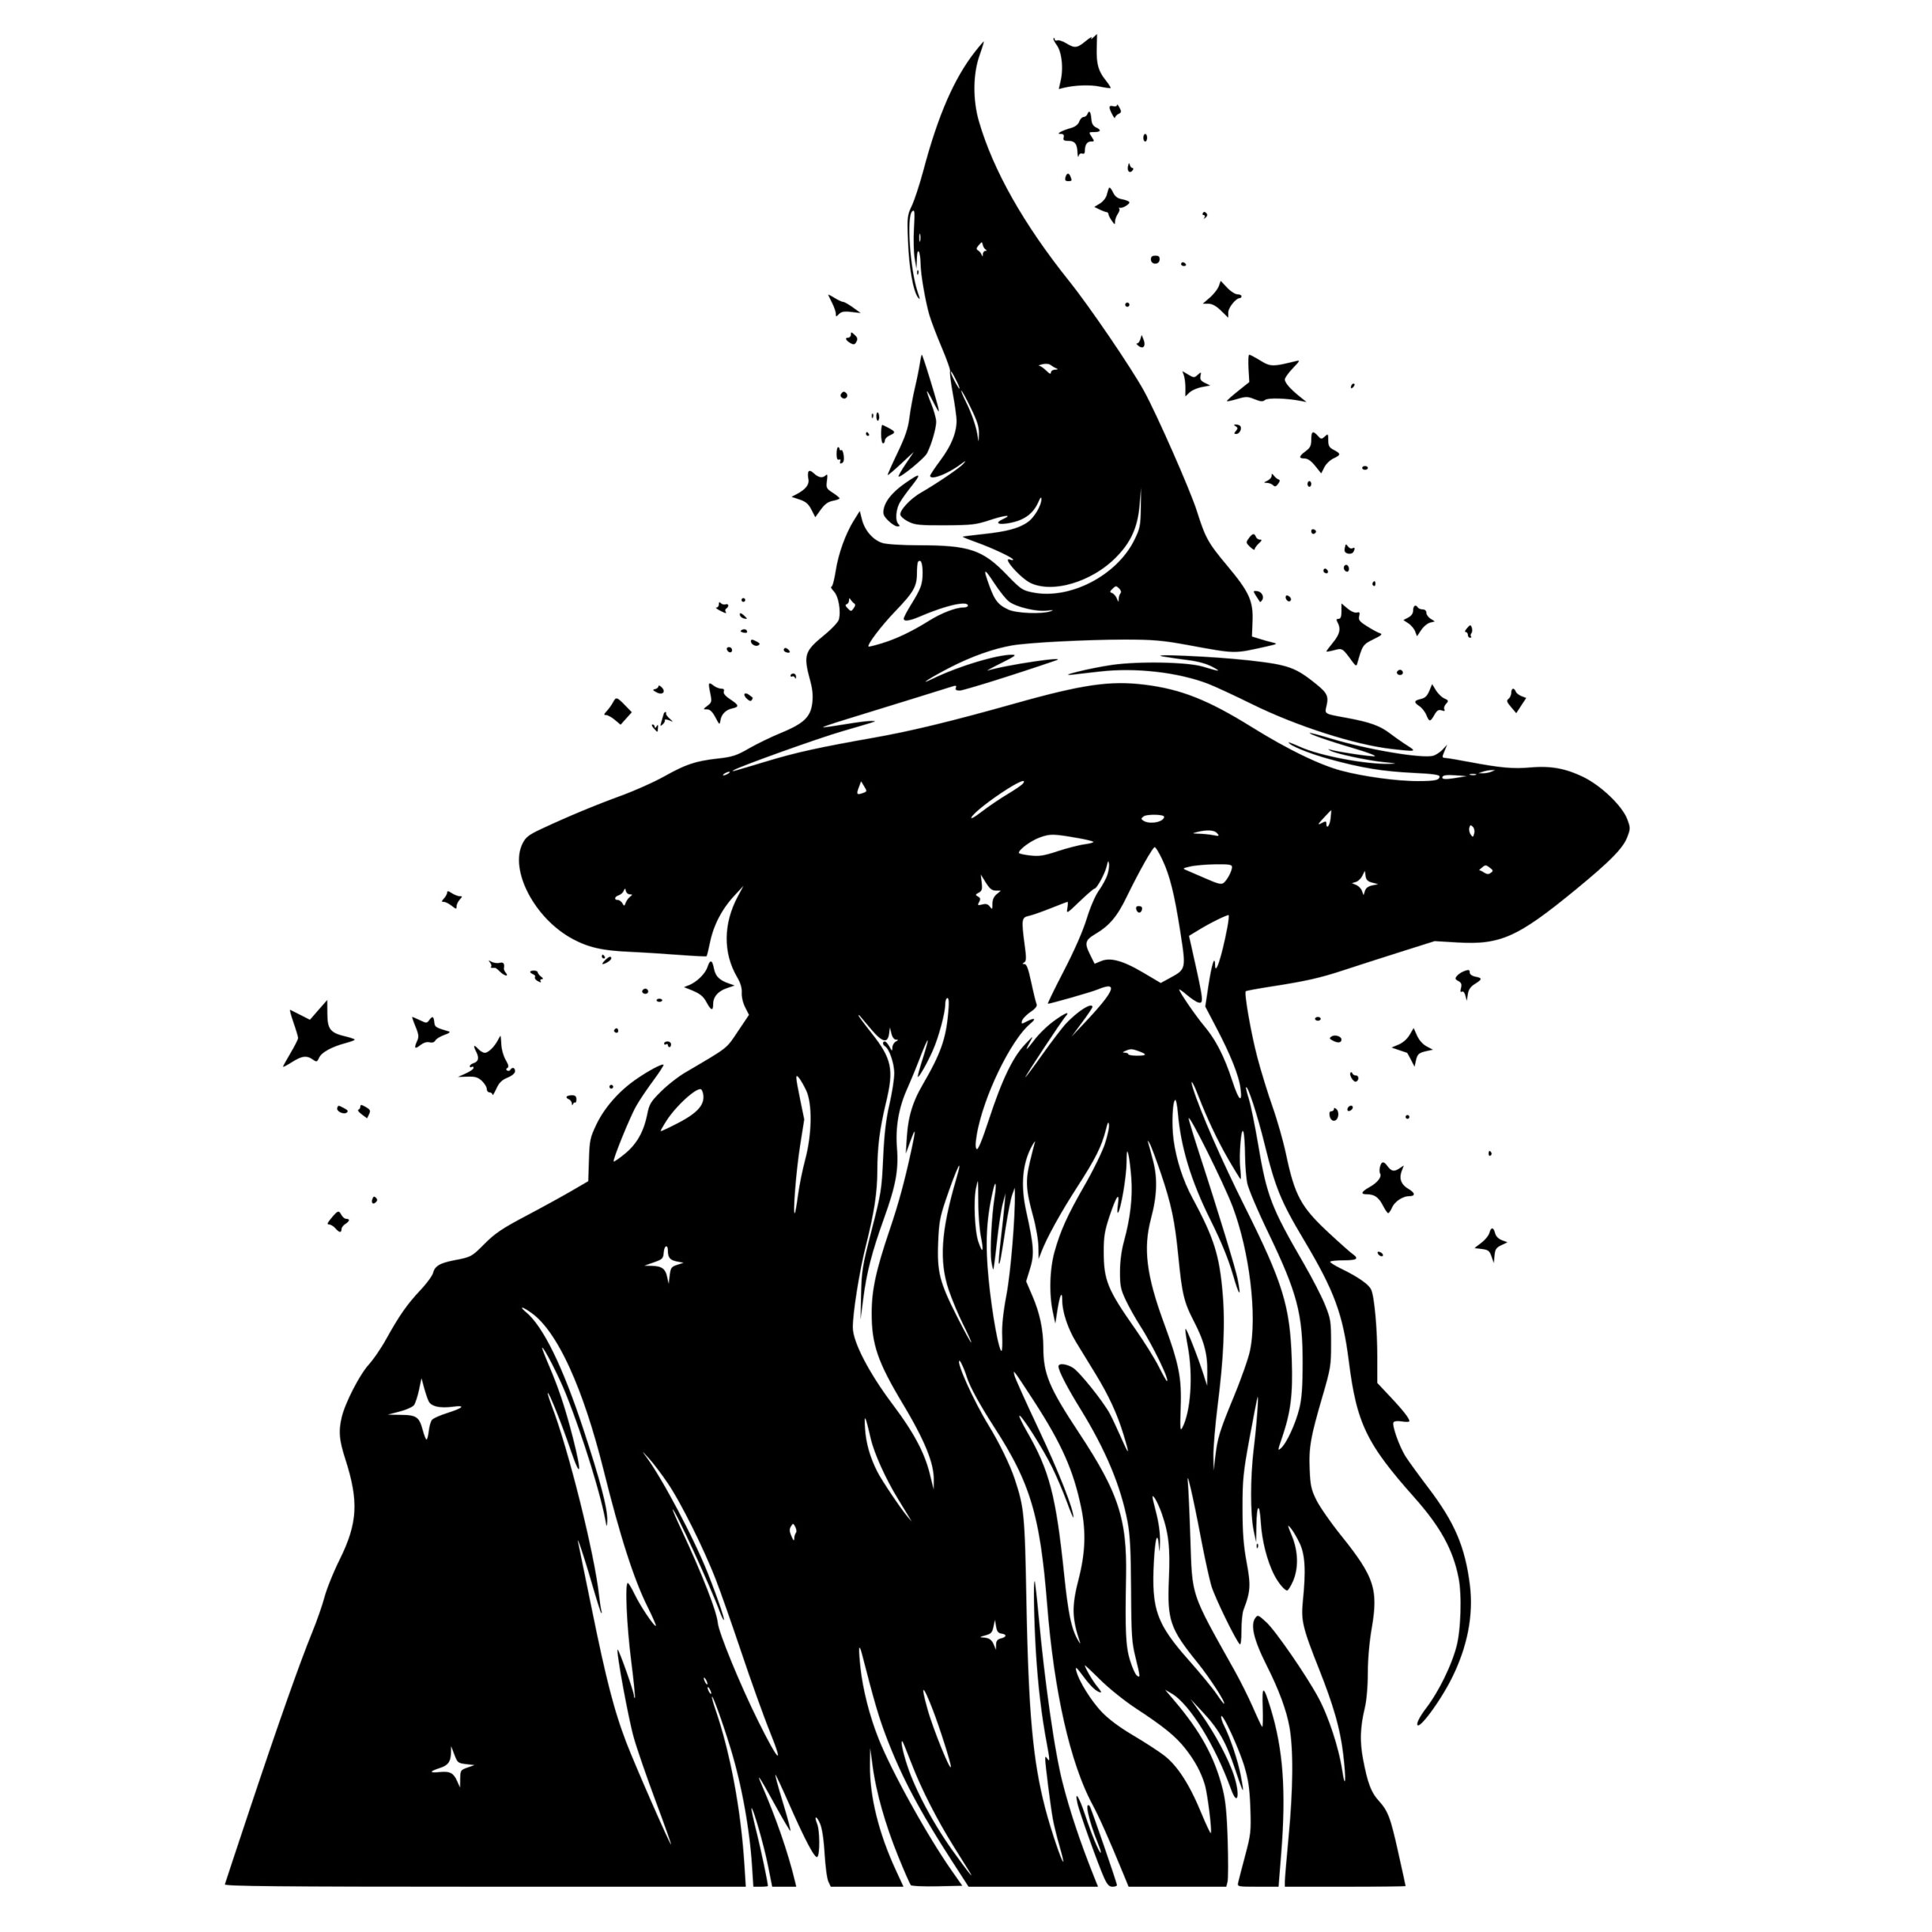 The mystical wizard